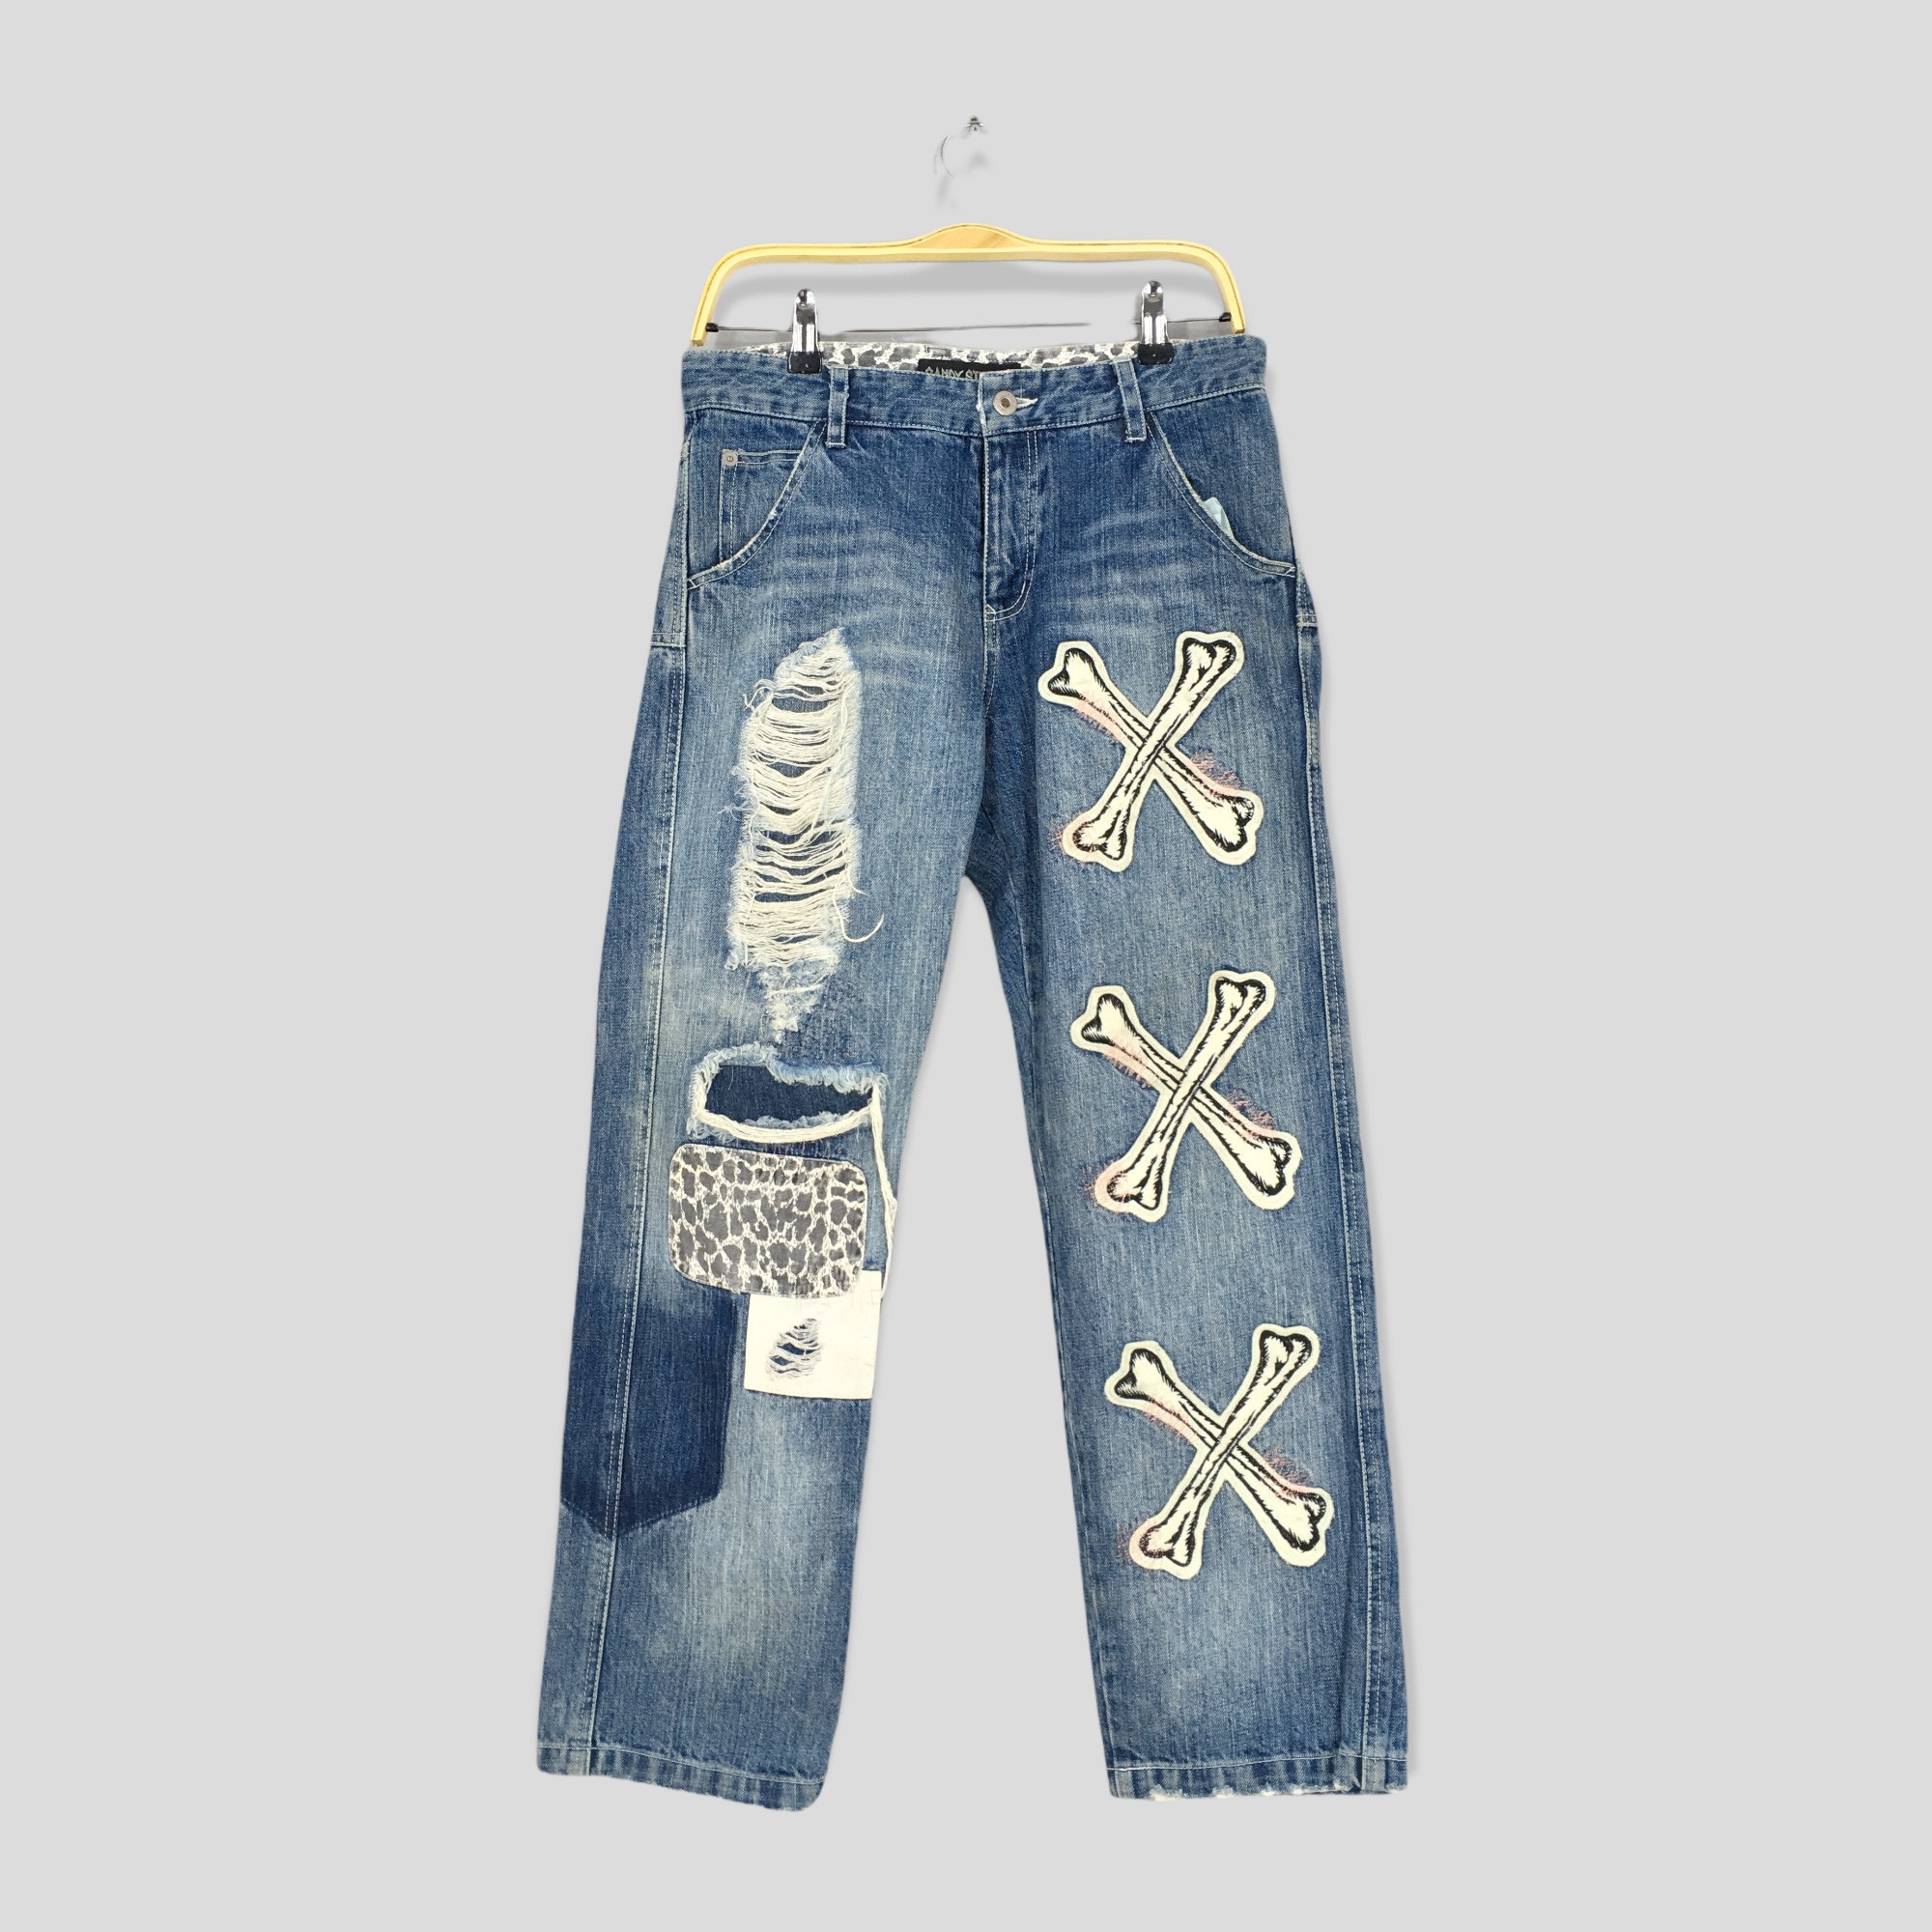 Candies Jeans - Etsy